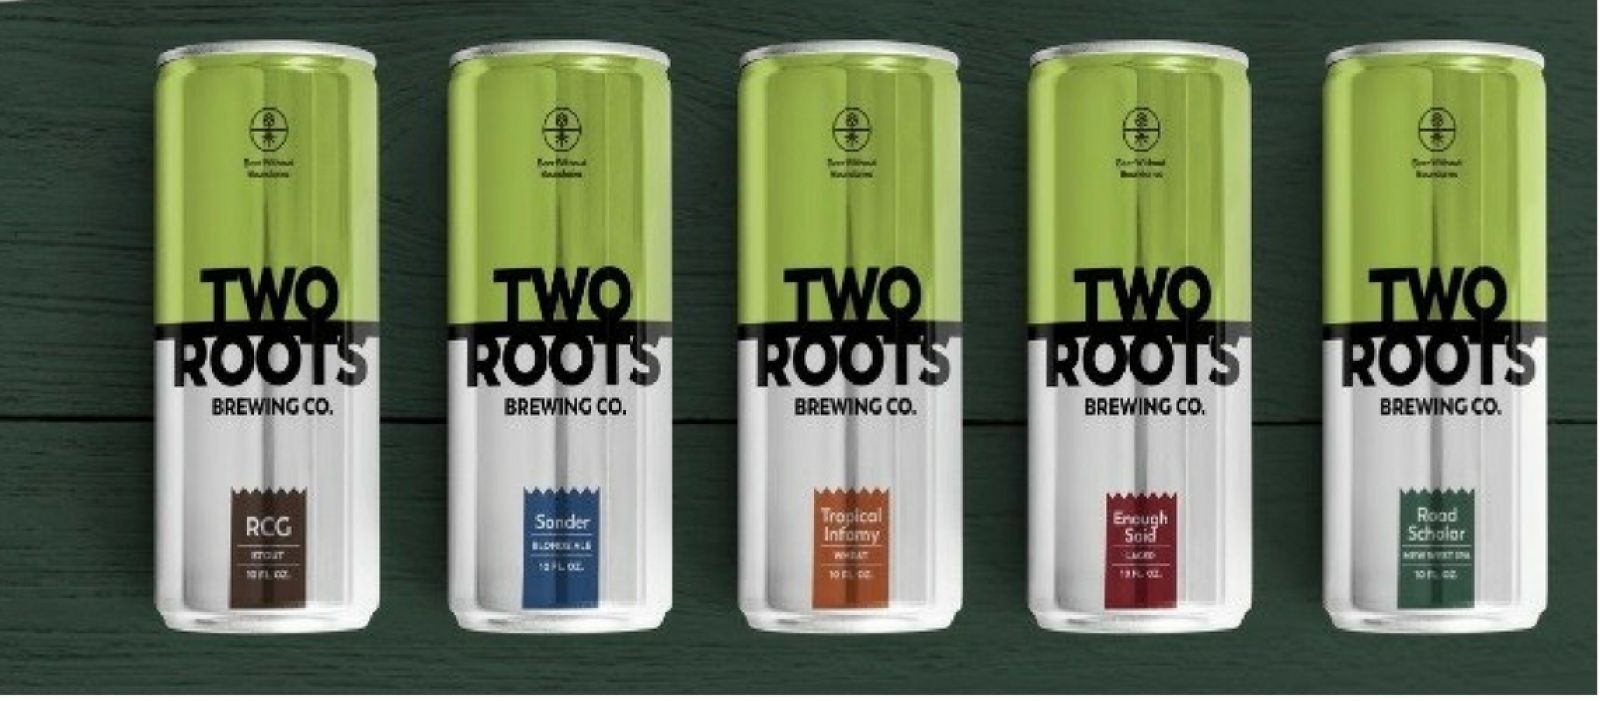 Photo for: Cannabiniers - A Company Producing Cannabis Infused Drinks